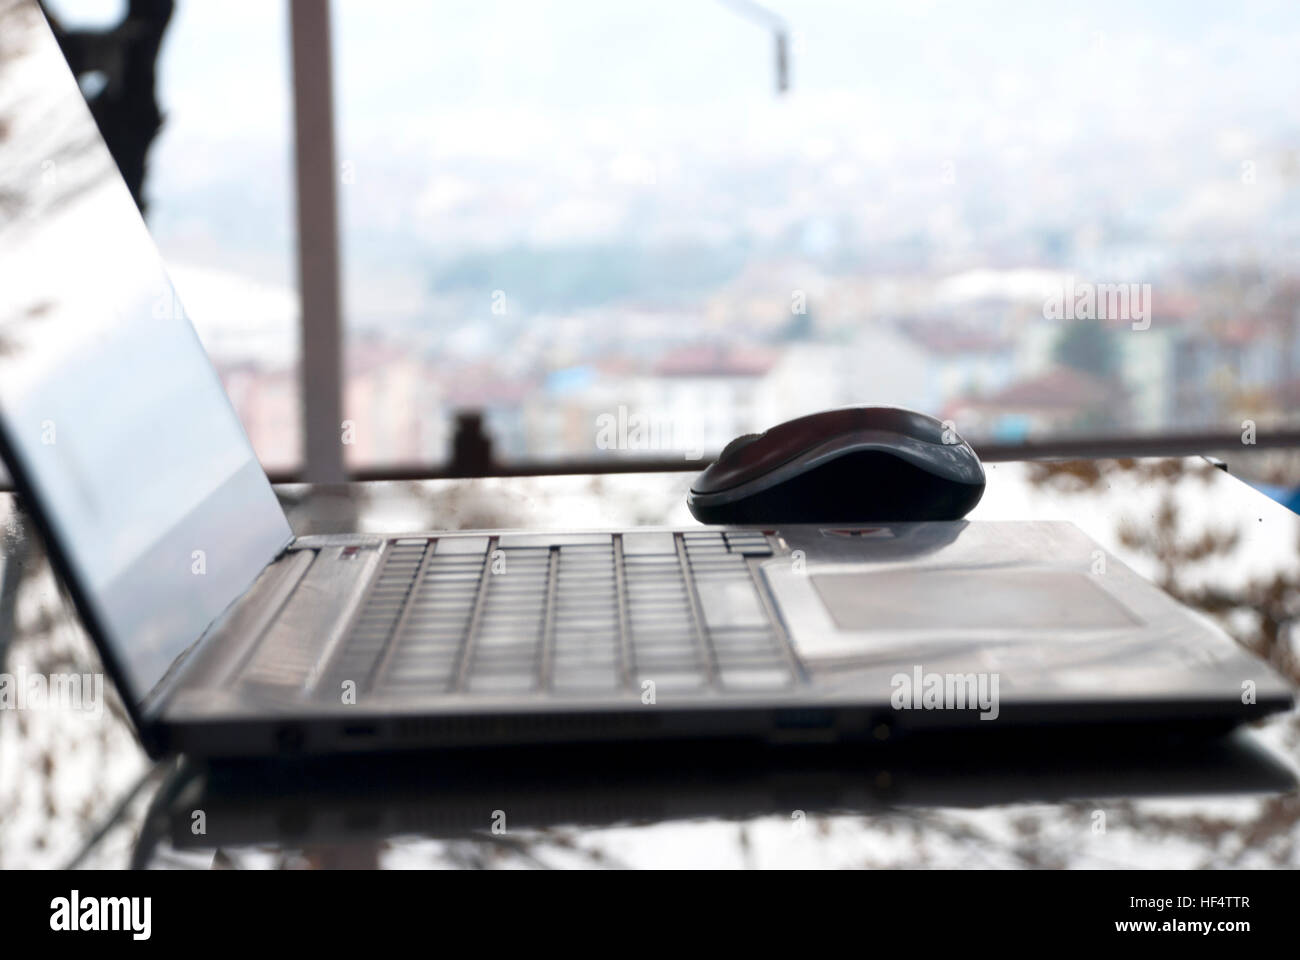 Laptop computer on a glass table at the window. Stock Photo